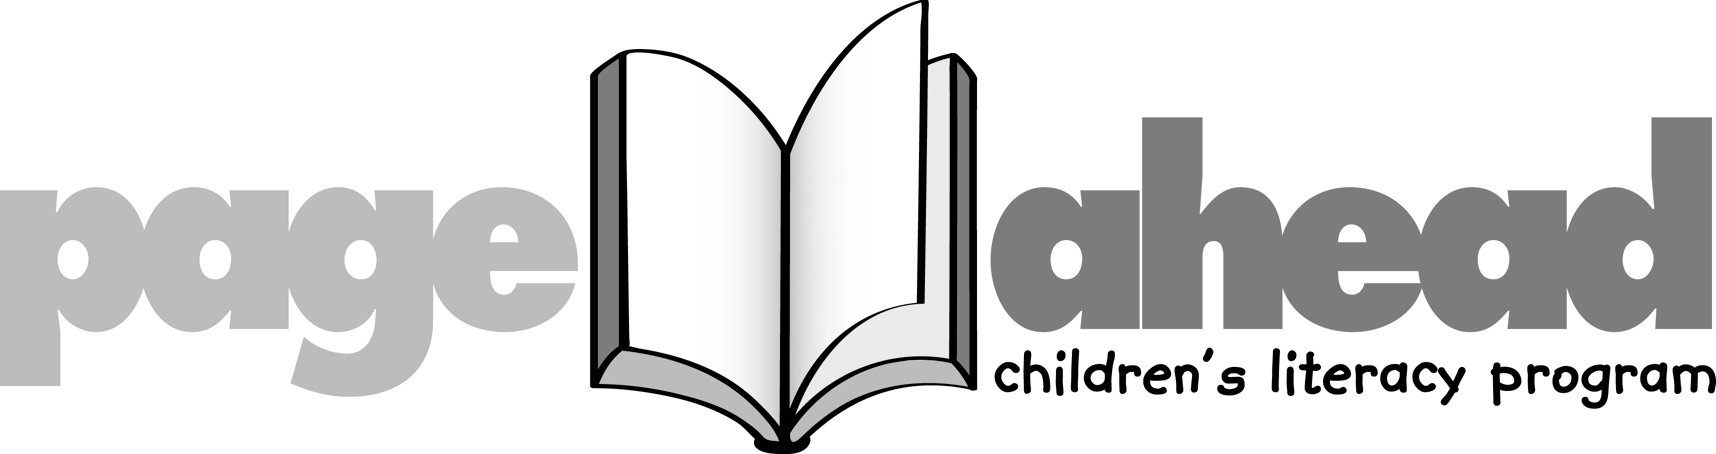 Page Ahead Children’s Literacy Program: Books to